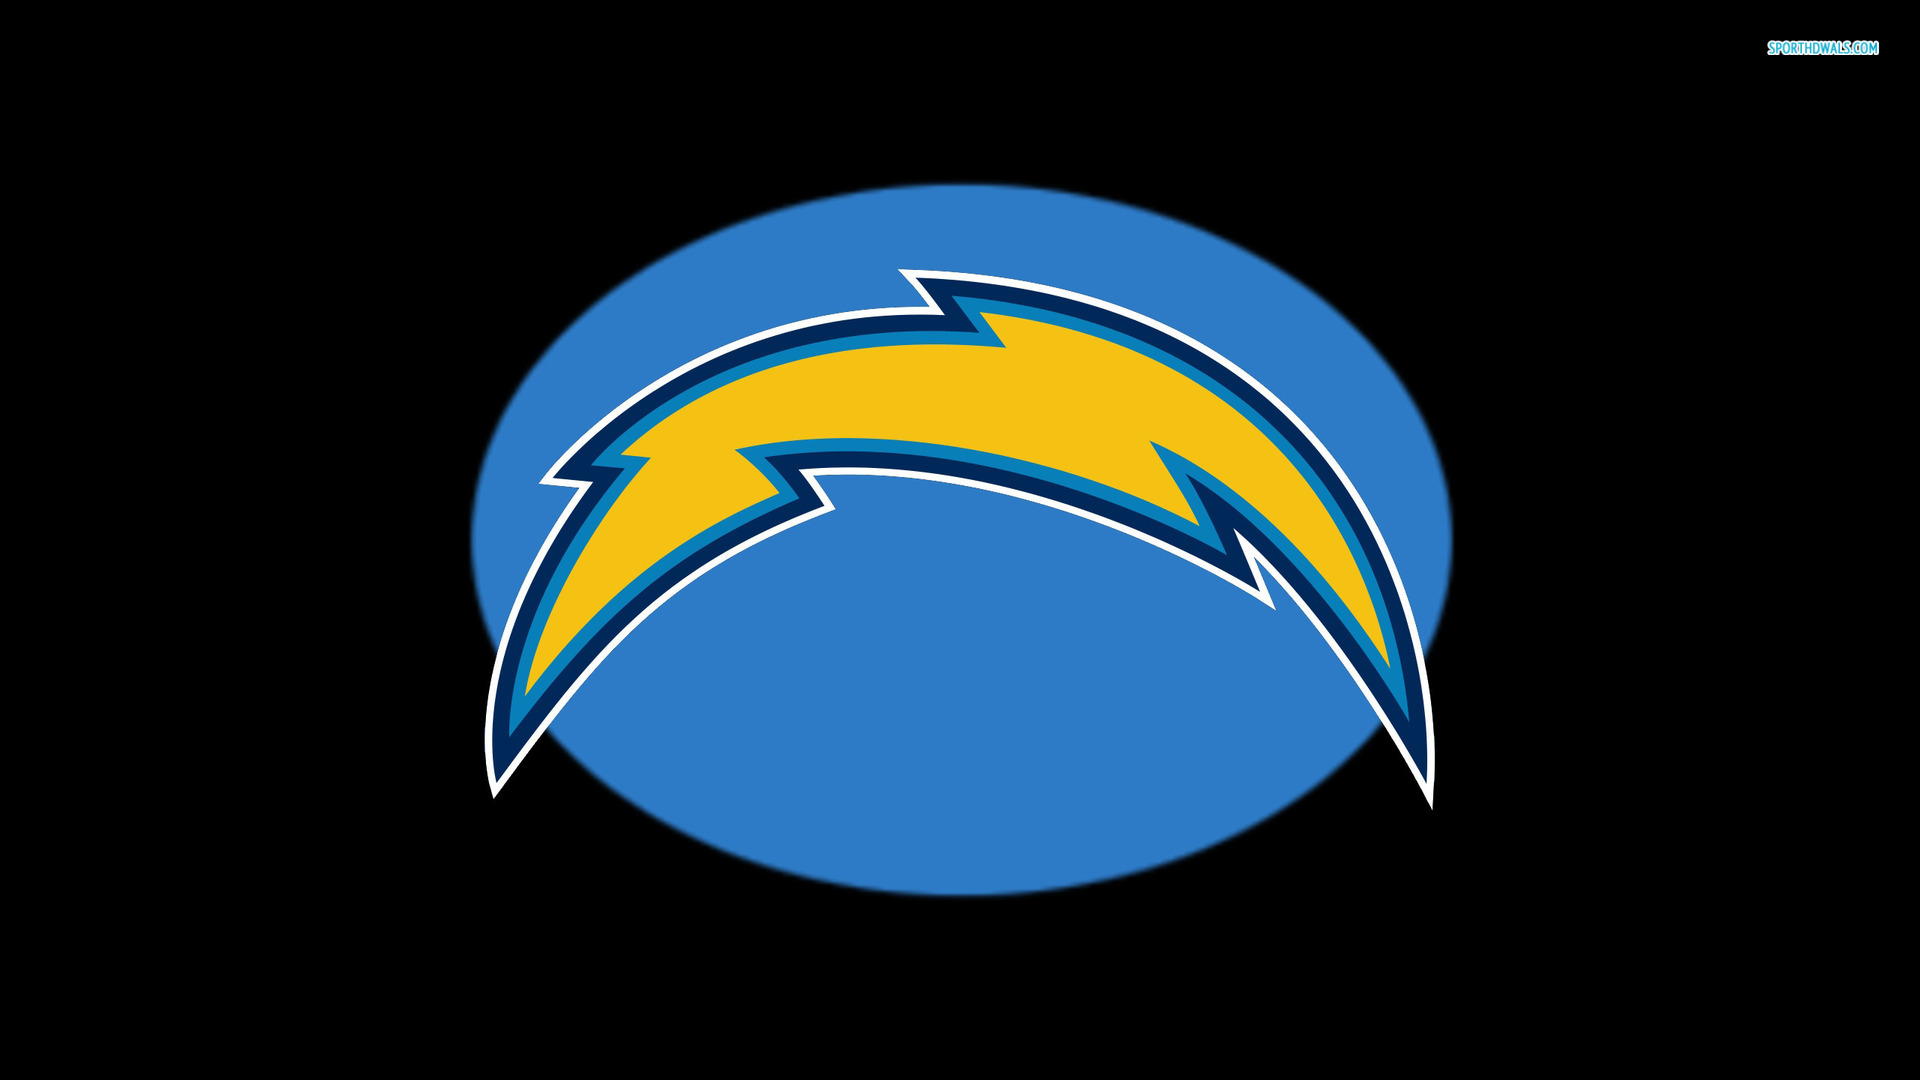 SAN DIEGO CHARGERS nfl football bw wallpaper 1920x1080